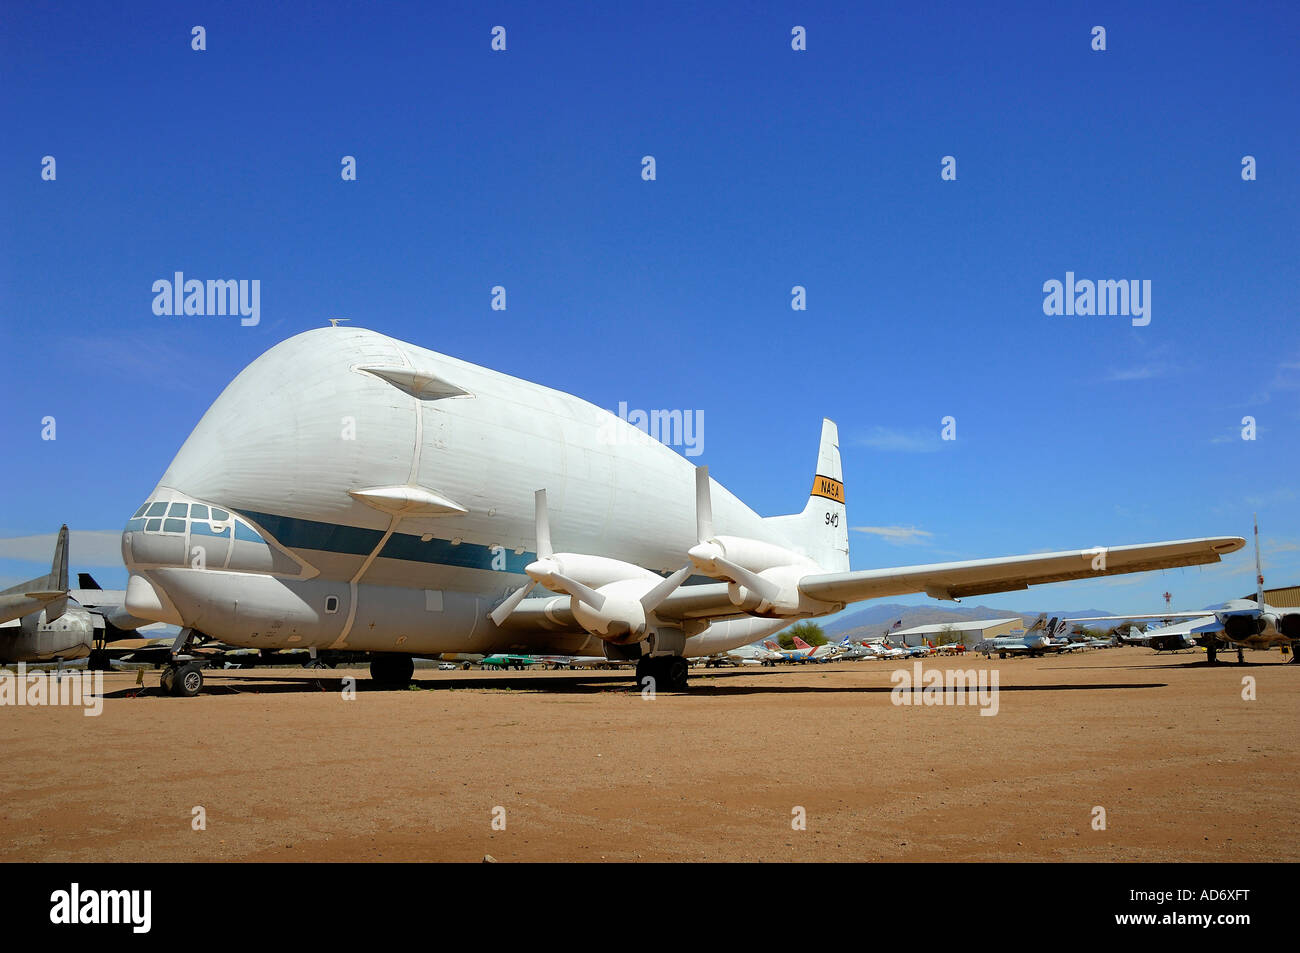 Side view of a Super Guppy aircraft, used to transport The Hubble Telescope, at The Pima Air and Space Museum, Arizona, USA Stock Photo